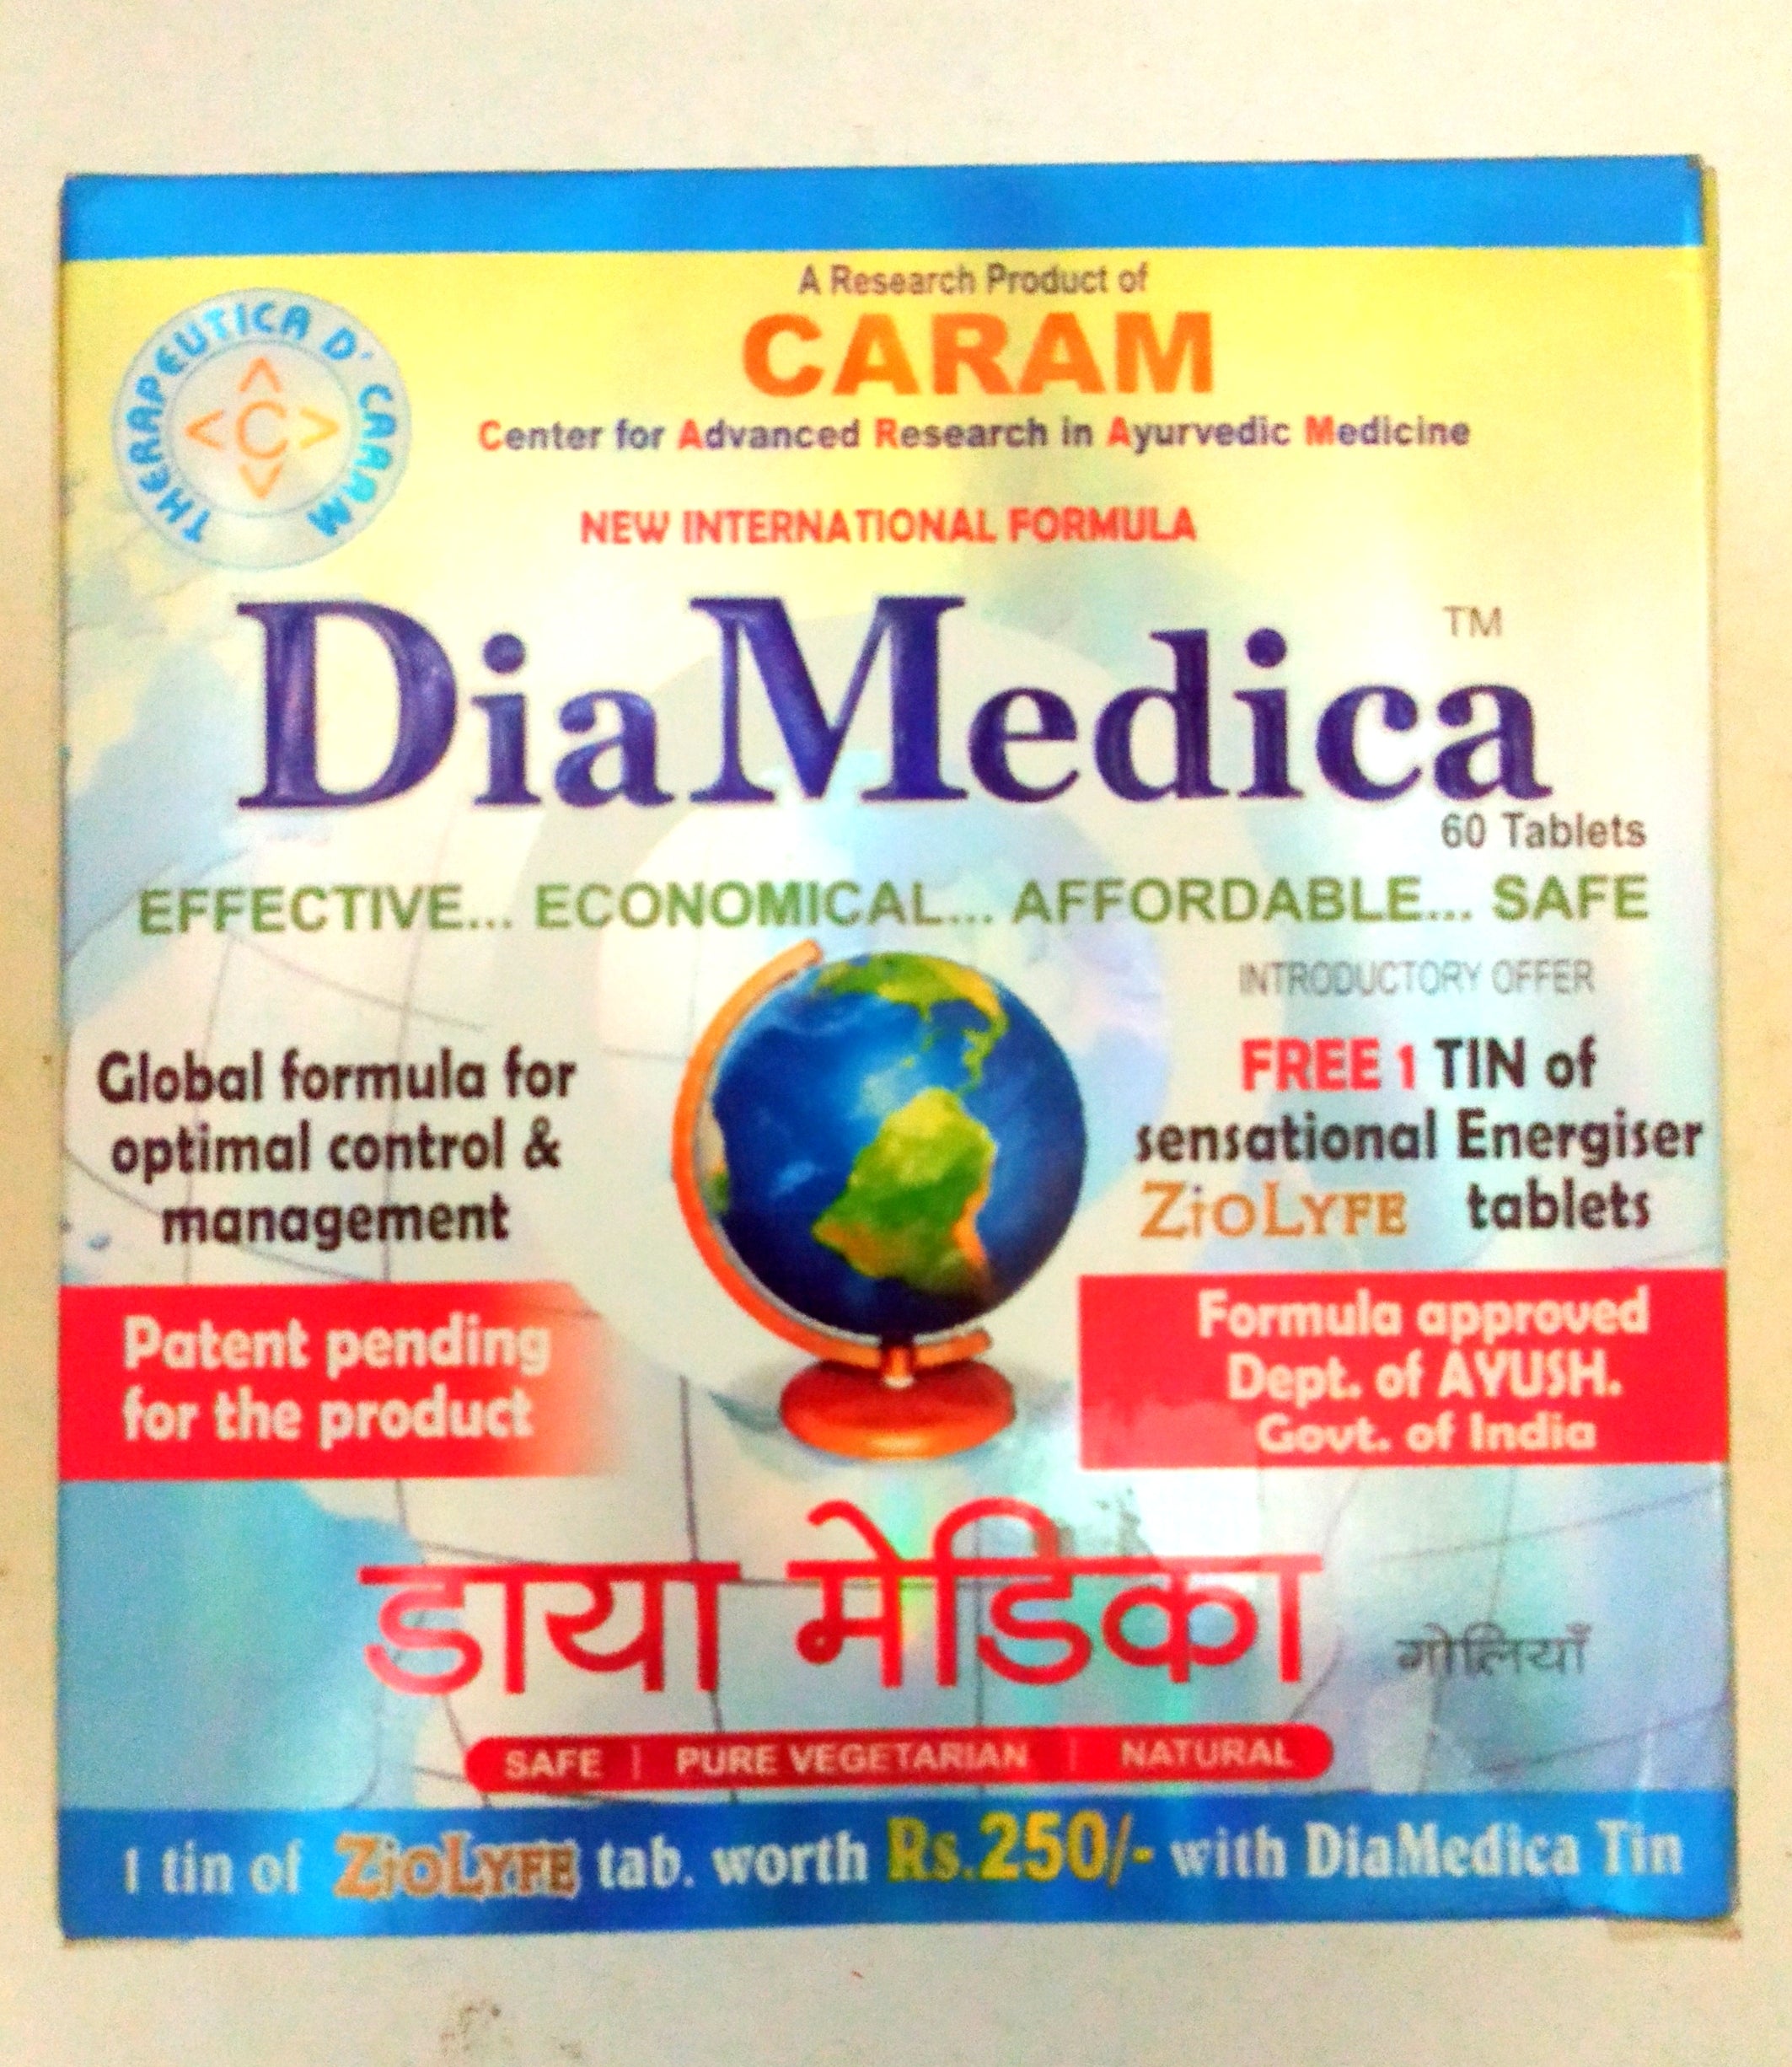 Shop Madhu sanjeevini Dia medica 80Tablets at price 365.00 from Caram Online - Ayush Care